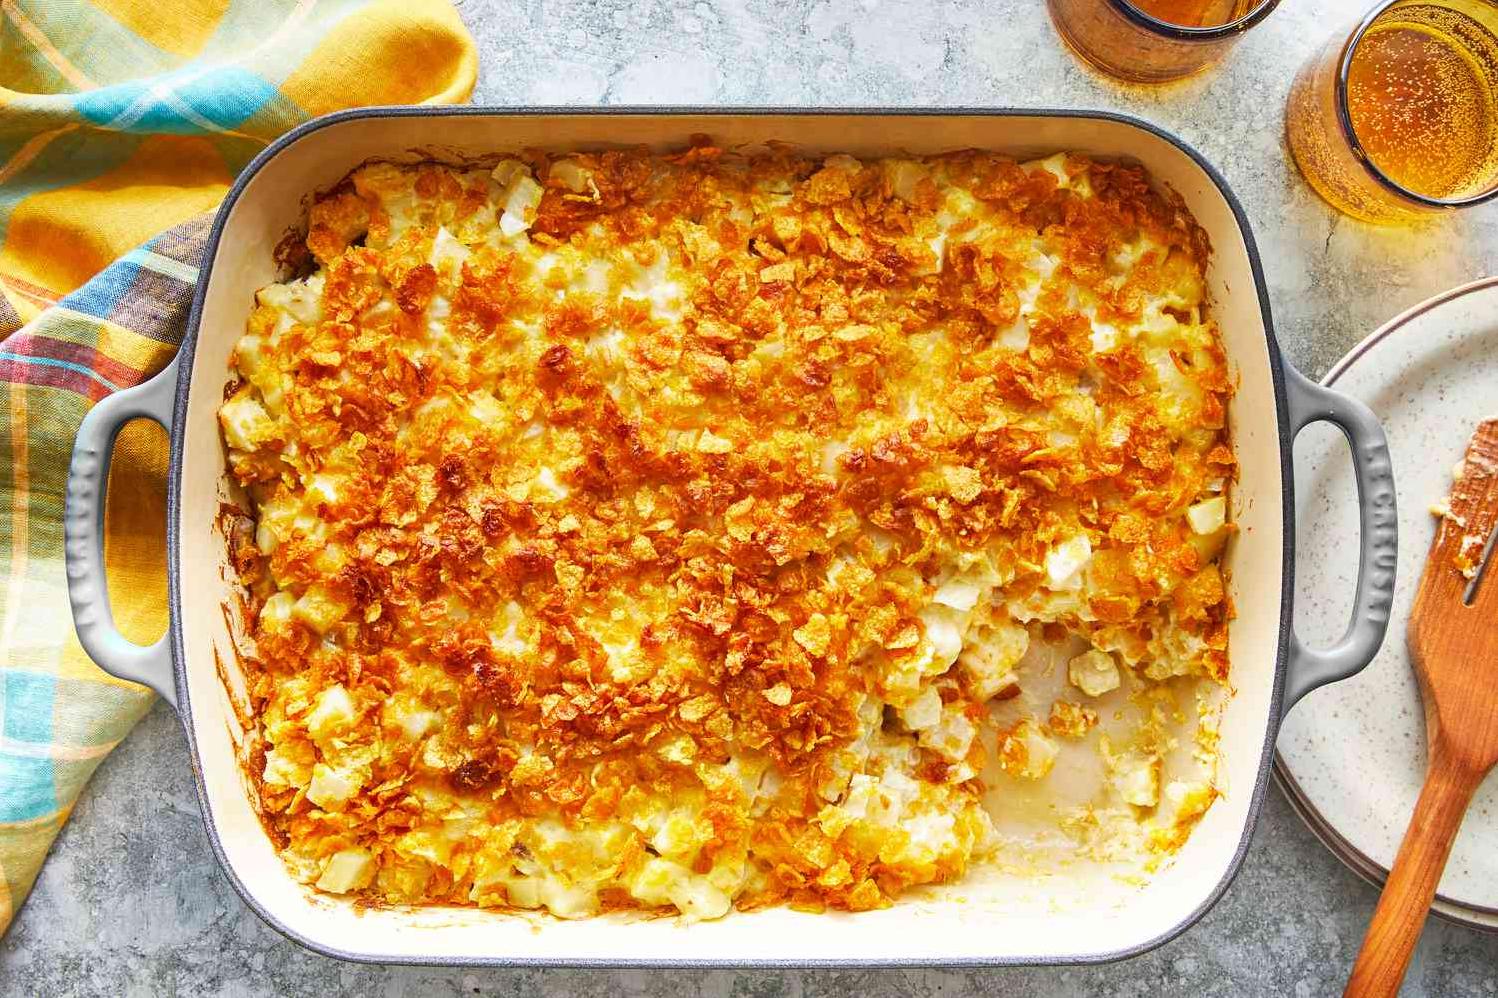  A crispy and golden brown layer of shredded potatoes on top - can you resist?